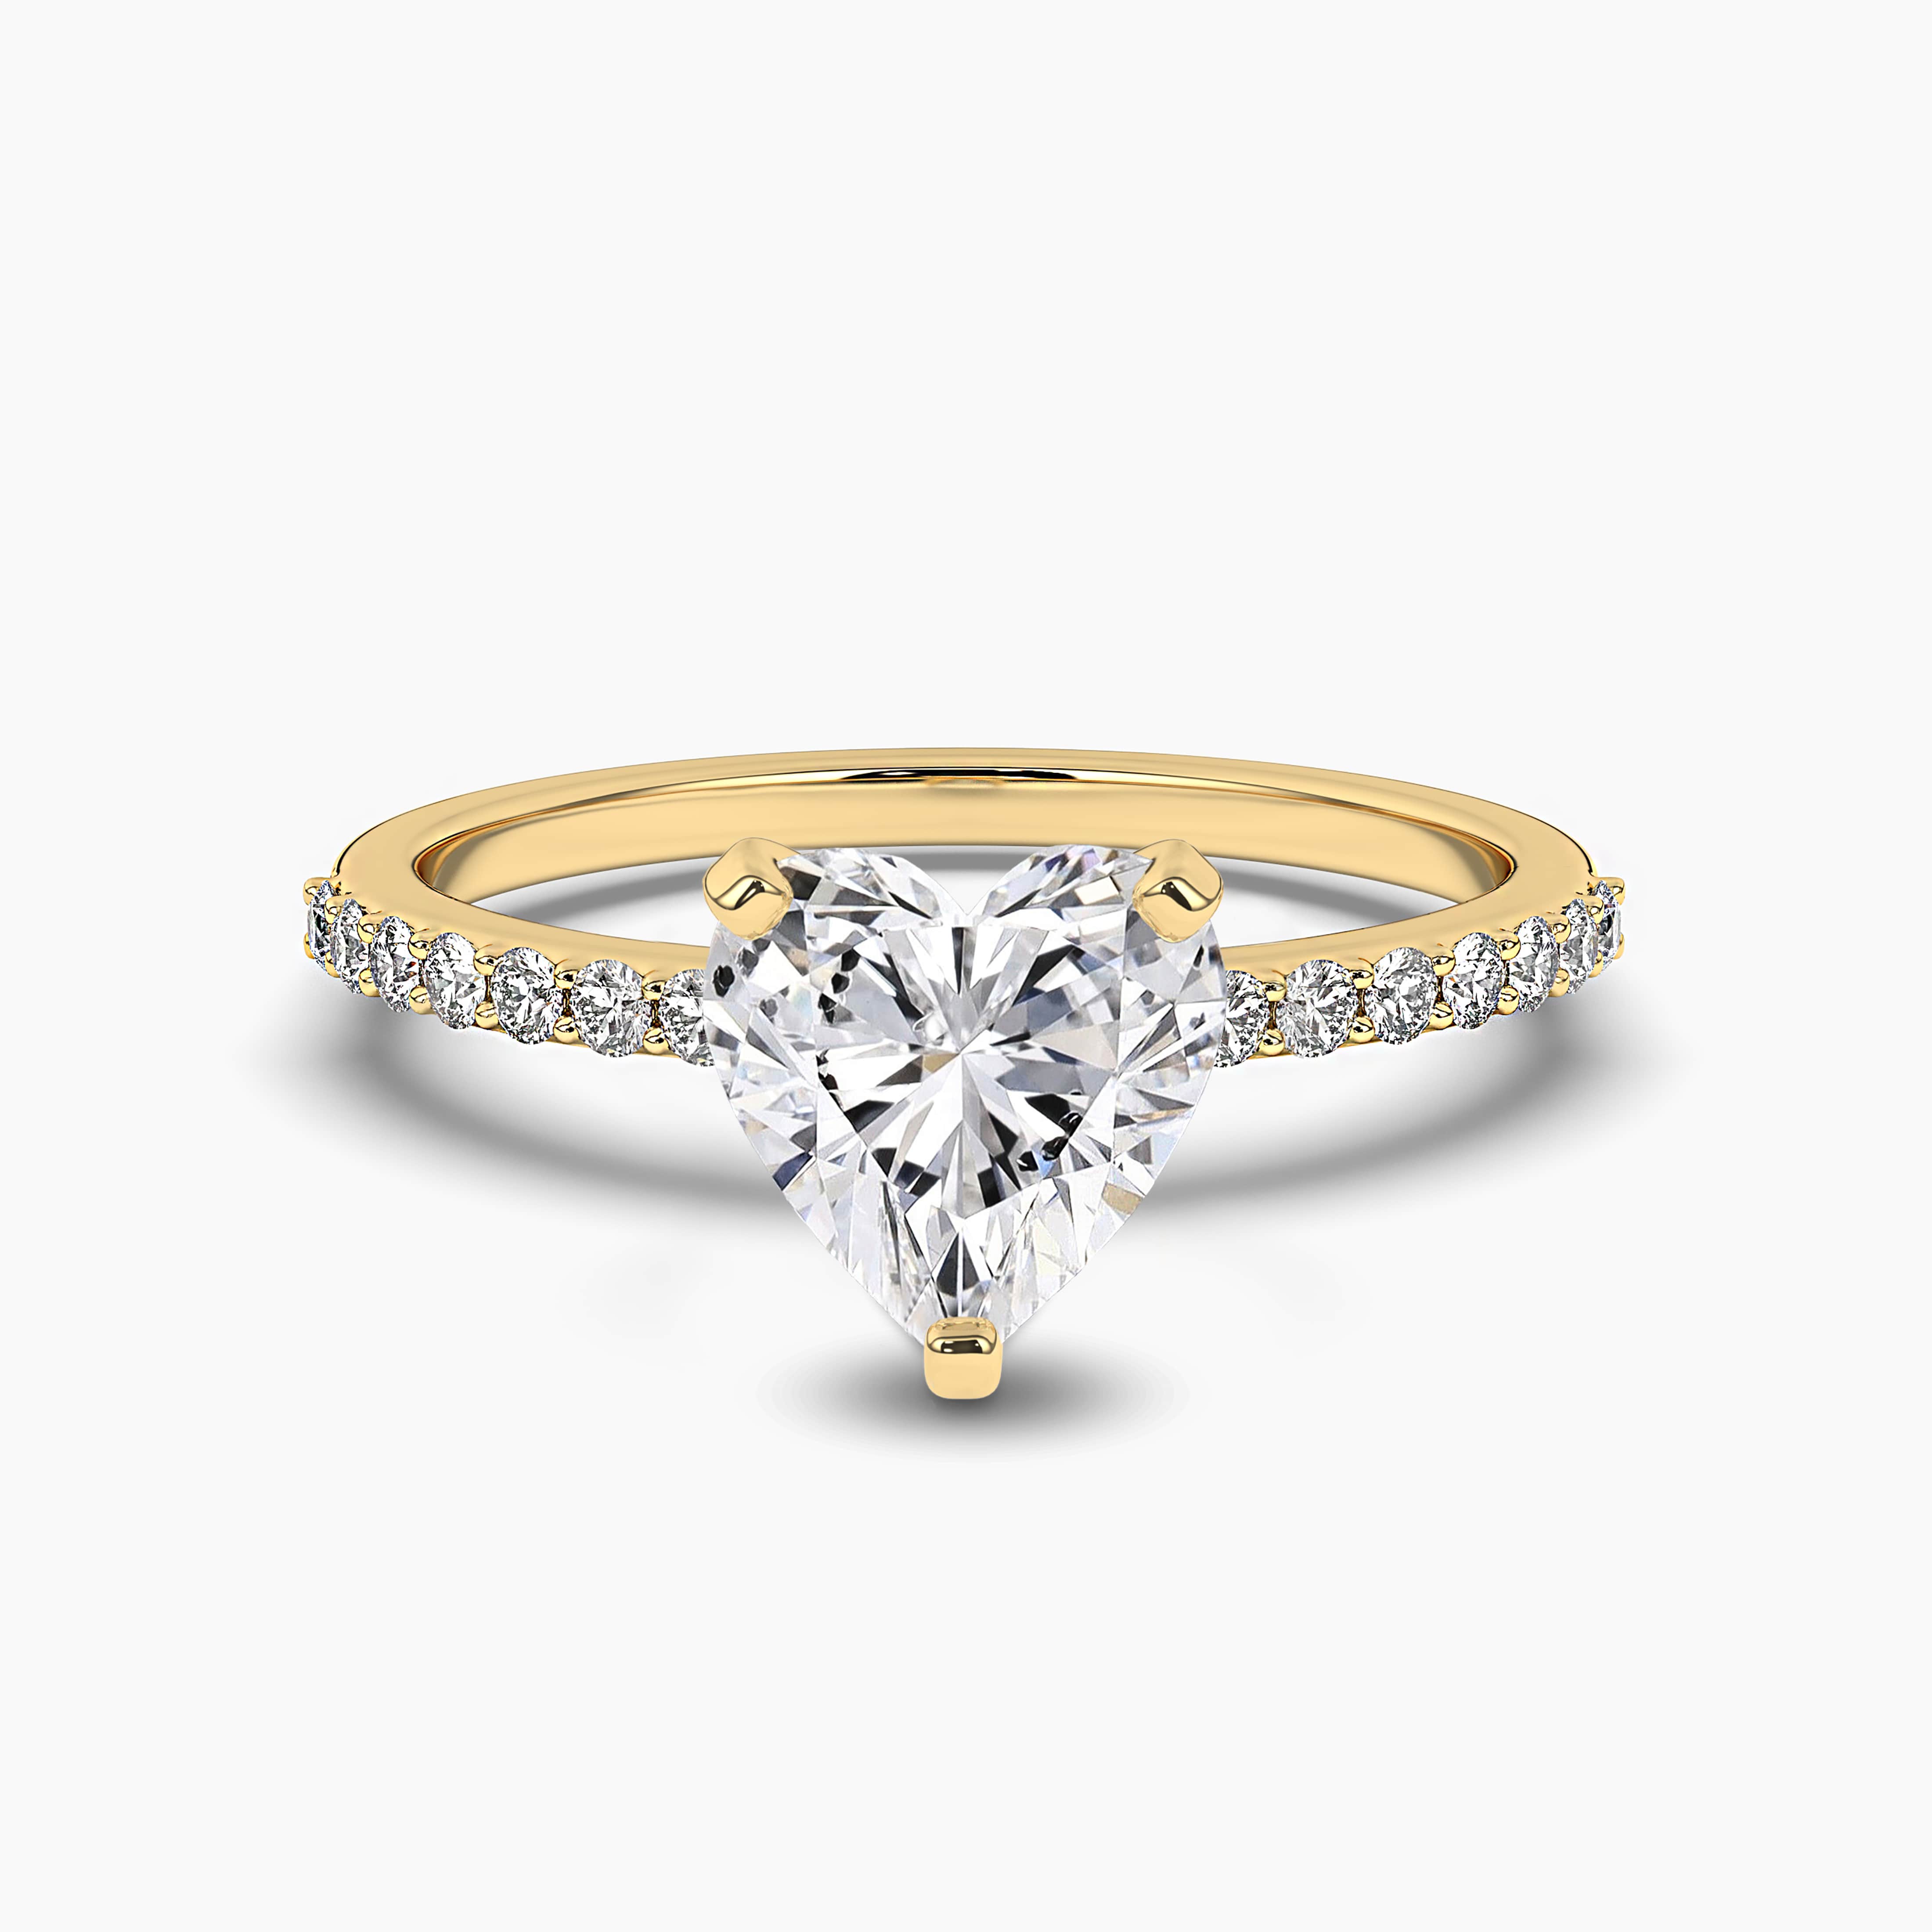 YELLOW GOLD HEART SHAPE DIAMOND ENGAGEMENT RING WITH SIDE STONES